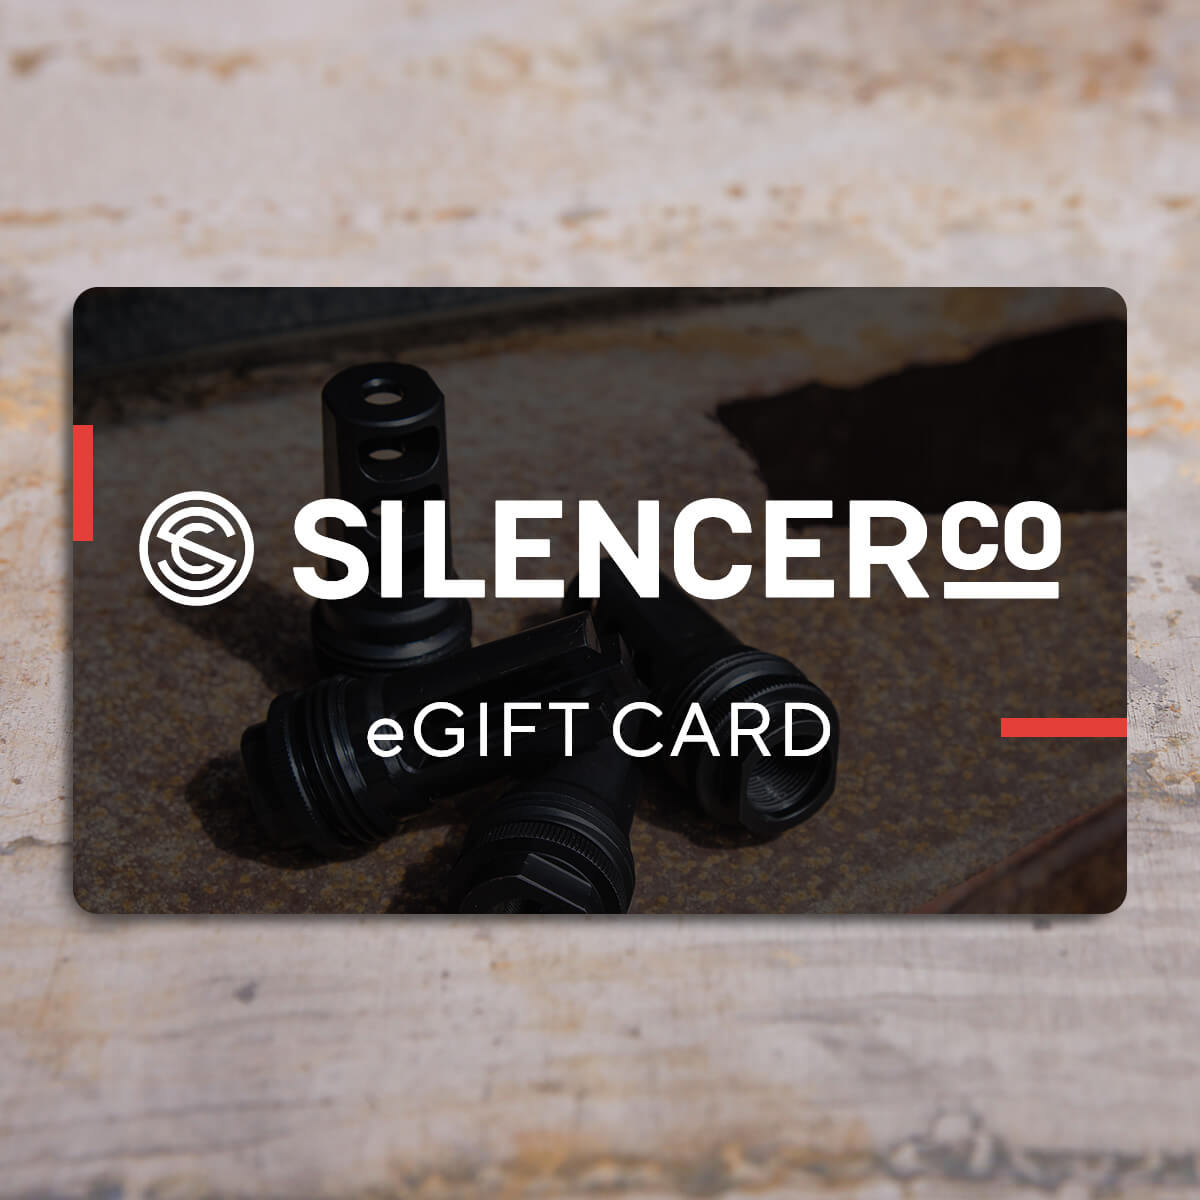 SilencerCo Gift Cards